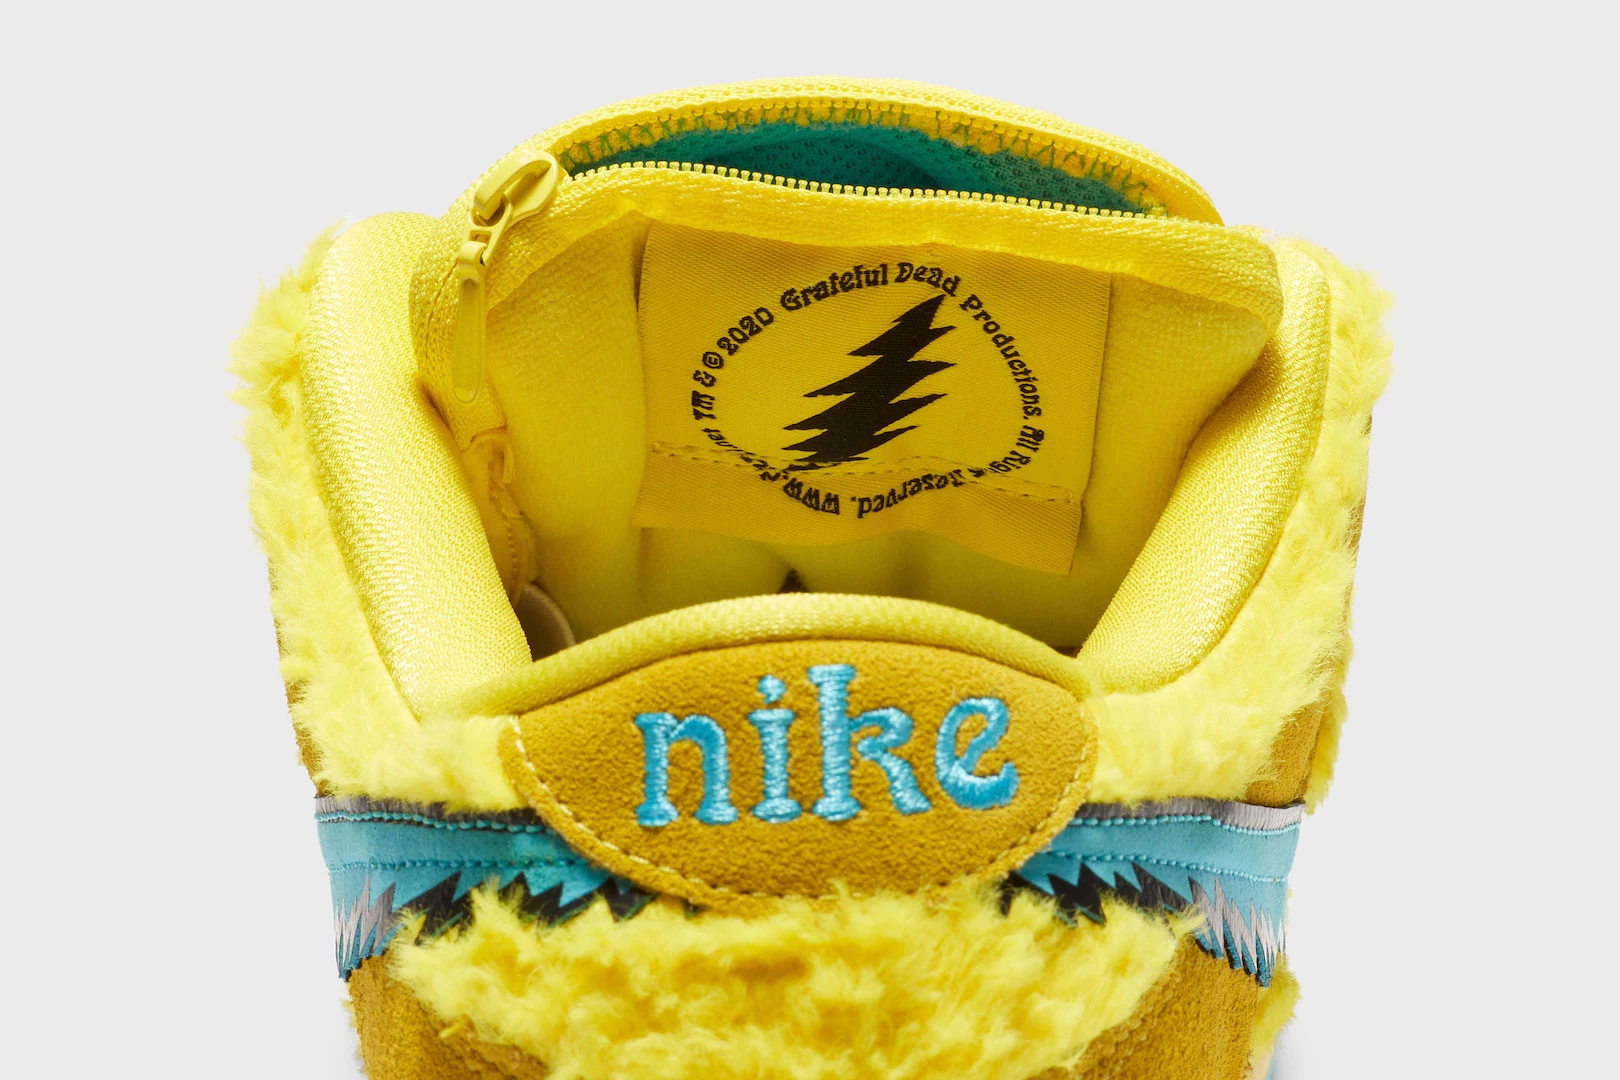 Nike's New Grateful Dead Sneakers Have 